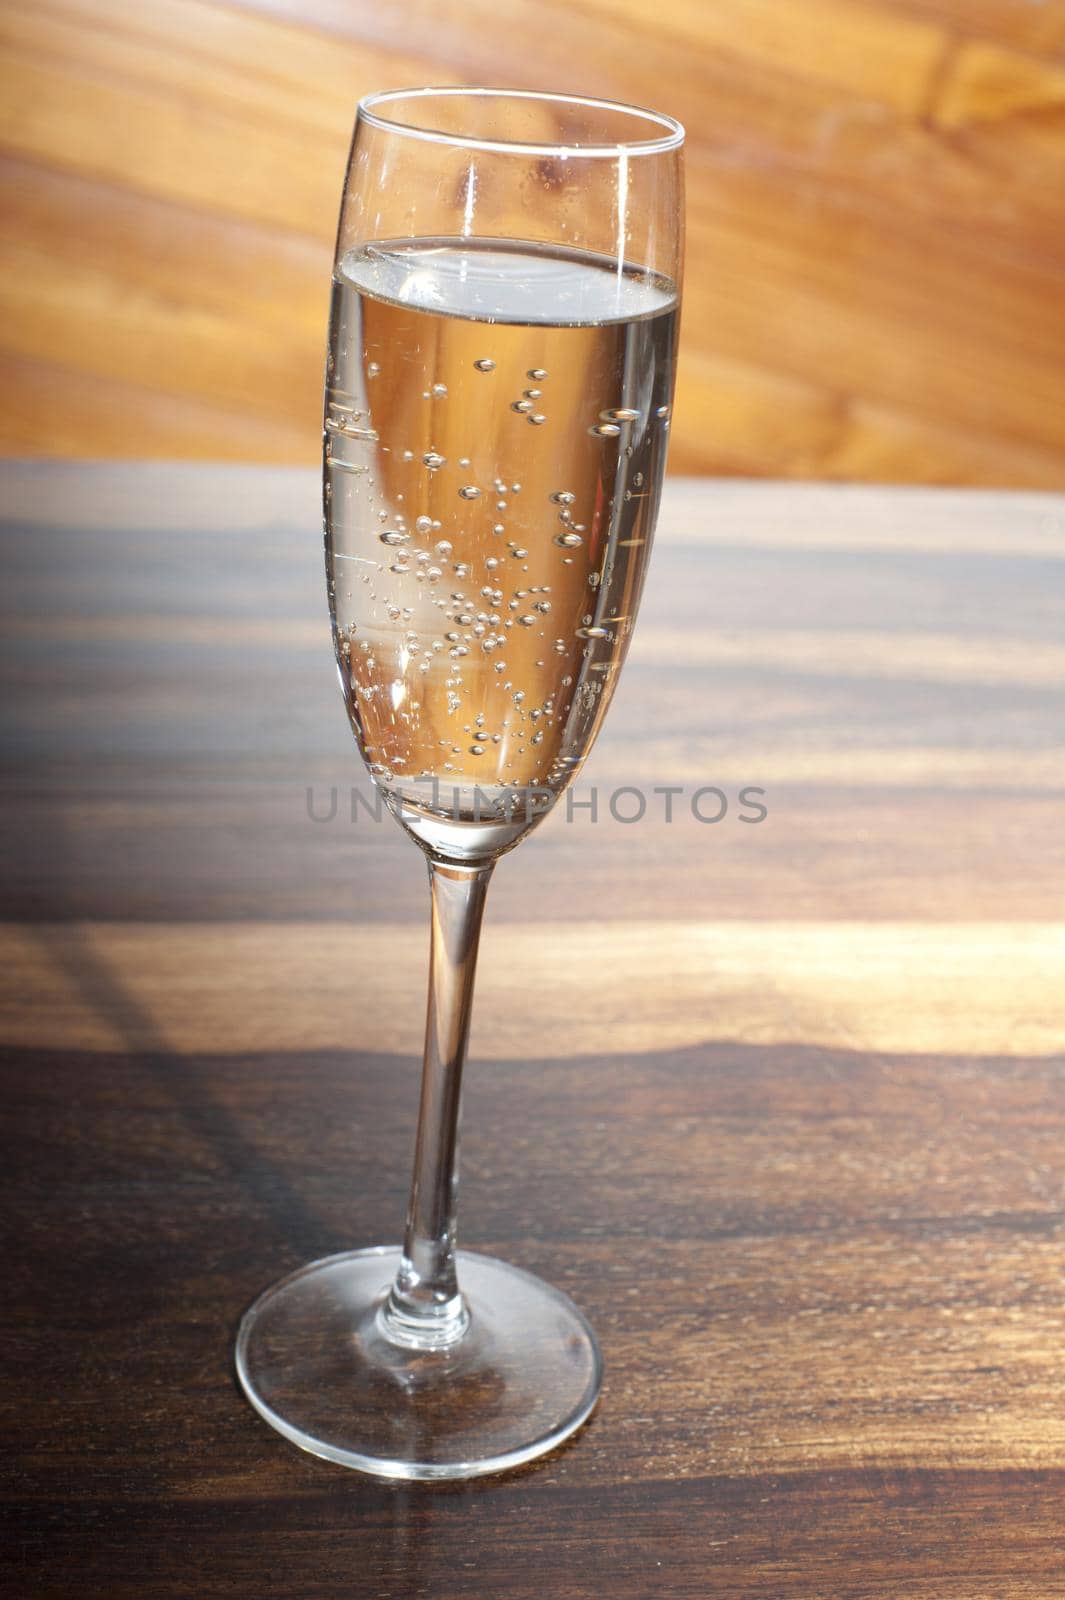 Elegant flute of sparkling wine or champagne to celebrate a special event at a party or romantic evening